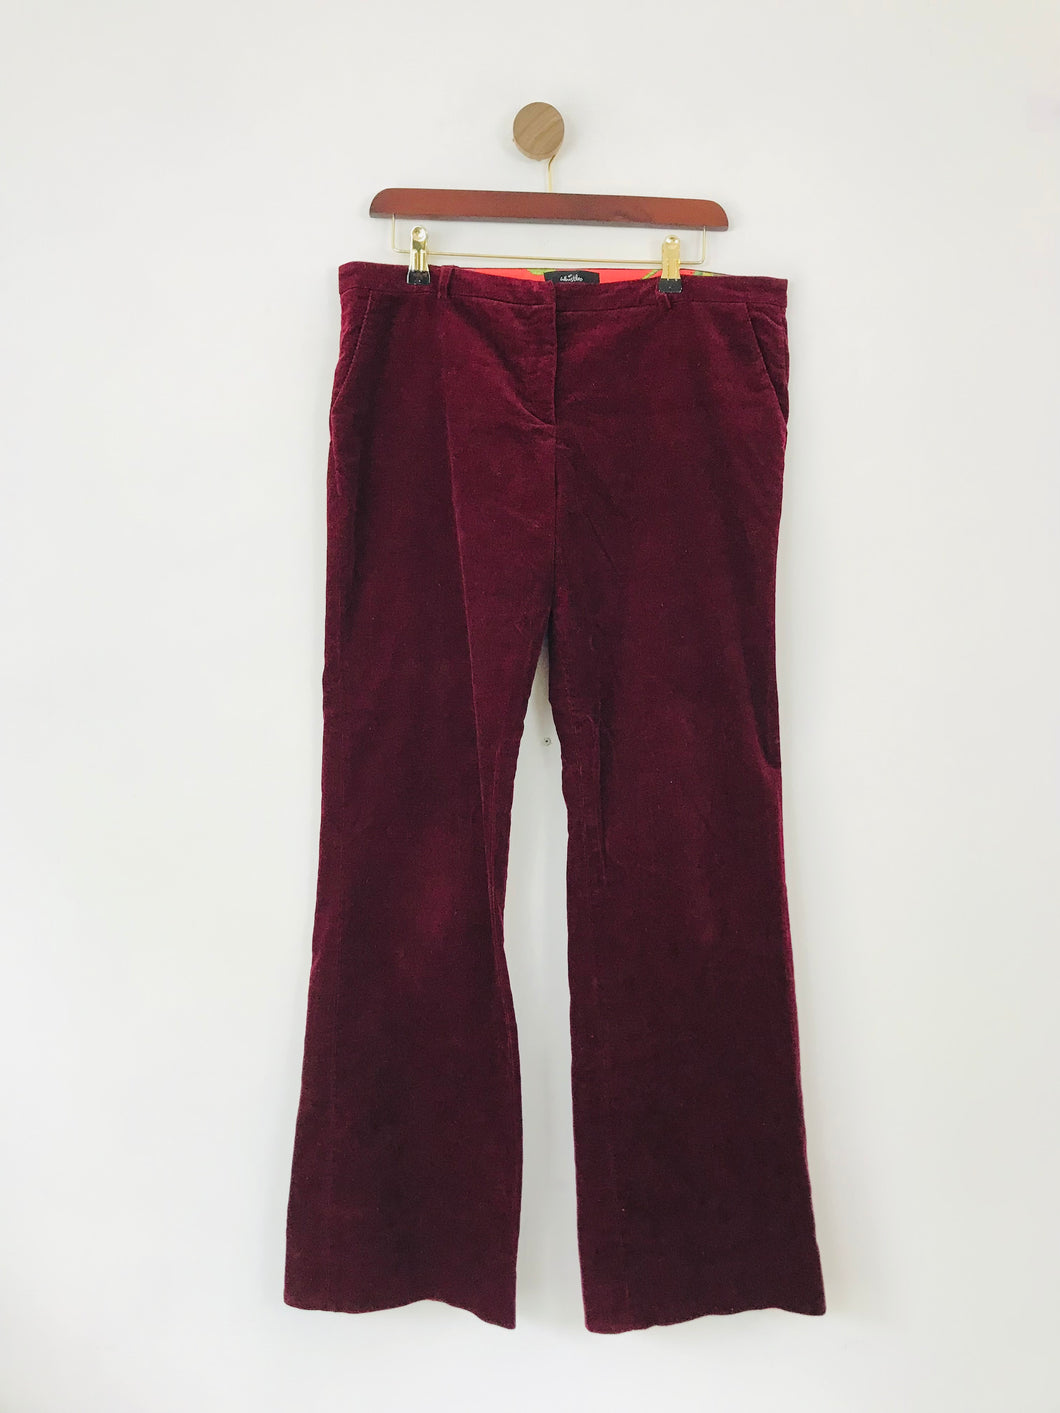 Whistles Women's Flare Corduroy Trousers | UK14 | Red